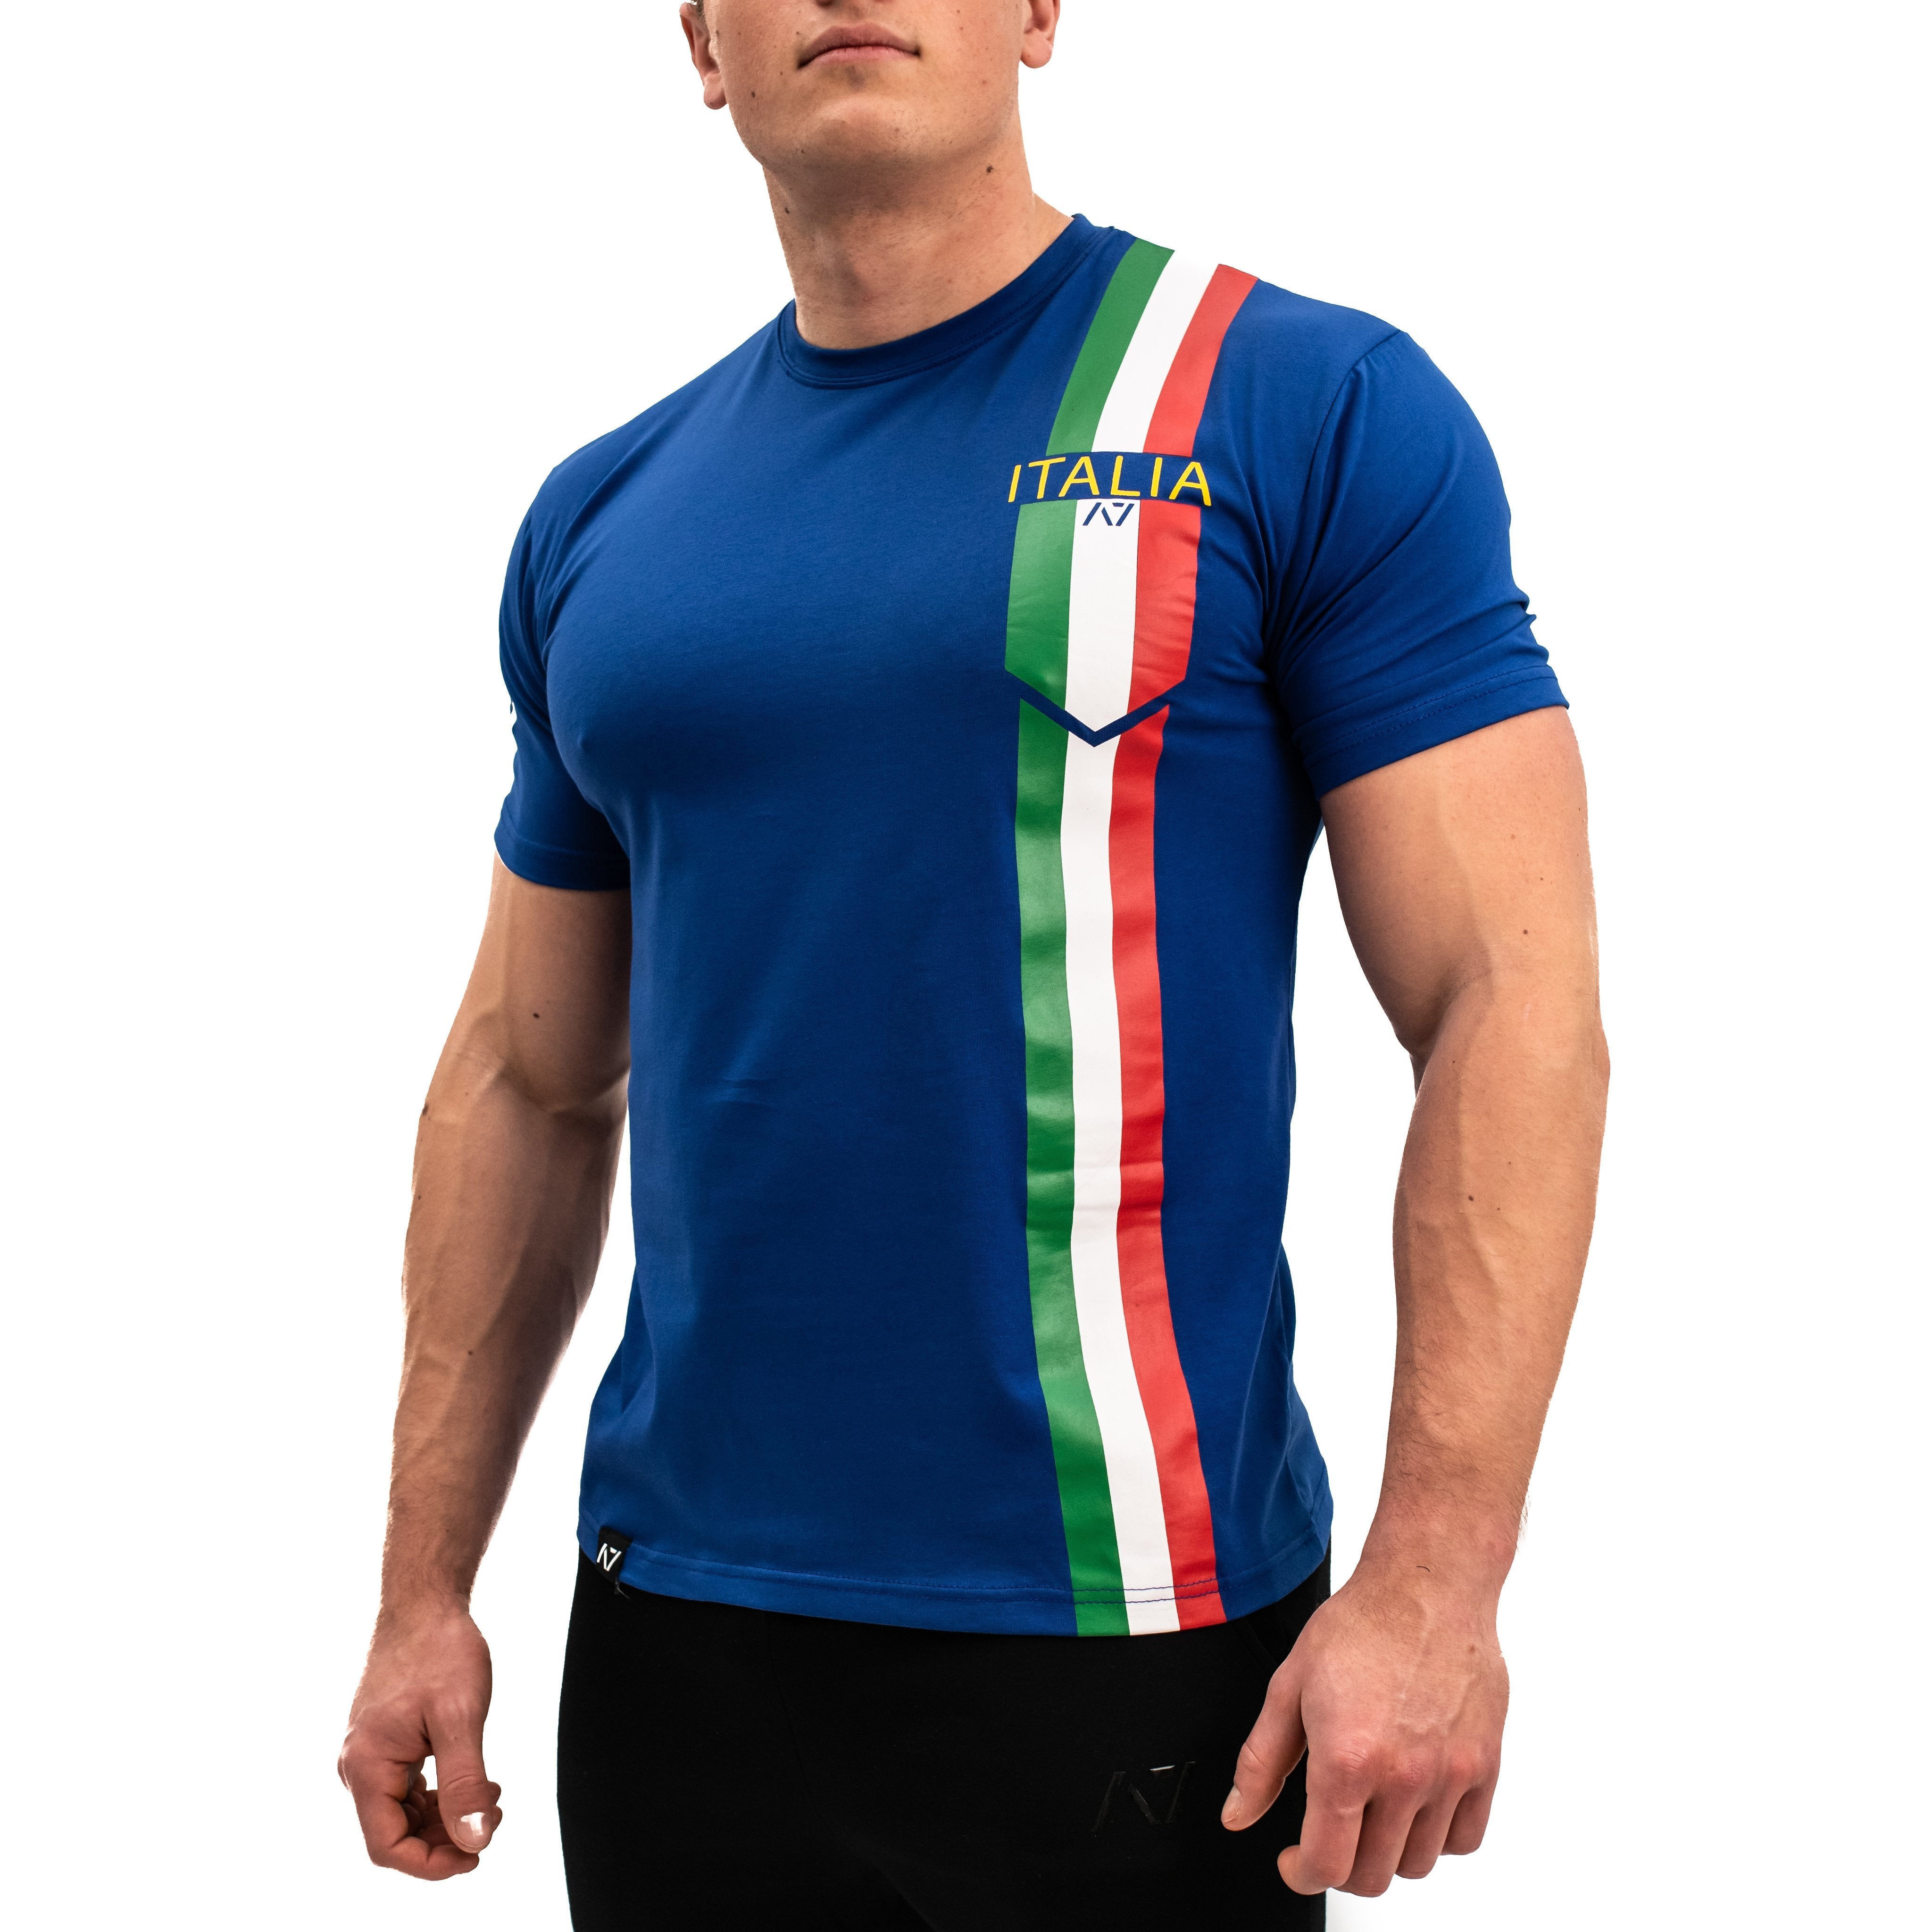 A7 Italia Bar Grip T-shirt is great as a squat shirt as well as for bench pressing. The perfect grip shirt. Purchase your Bar Grip tshirt in Europe and the UK from www.A7Europe.com. Purchase Bar Grip Shirt in Europe from A7 Europe. Best Bar Grip Tshirts, shipping to Italy and Europe from A7 Europe. The best Powerlifting apparel for all your workouts. A7 Italy Bar Grip available in UK and Europe including France, Italy, Germany, Sweden and Poland